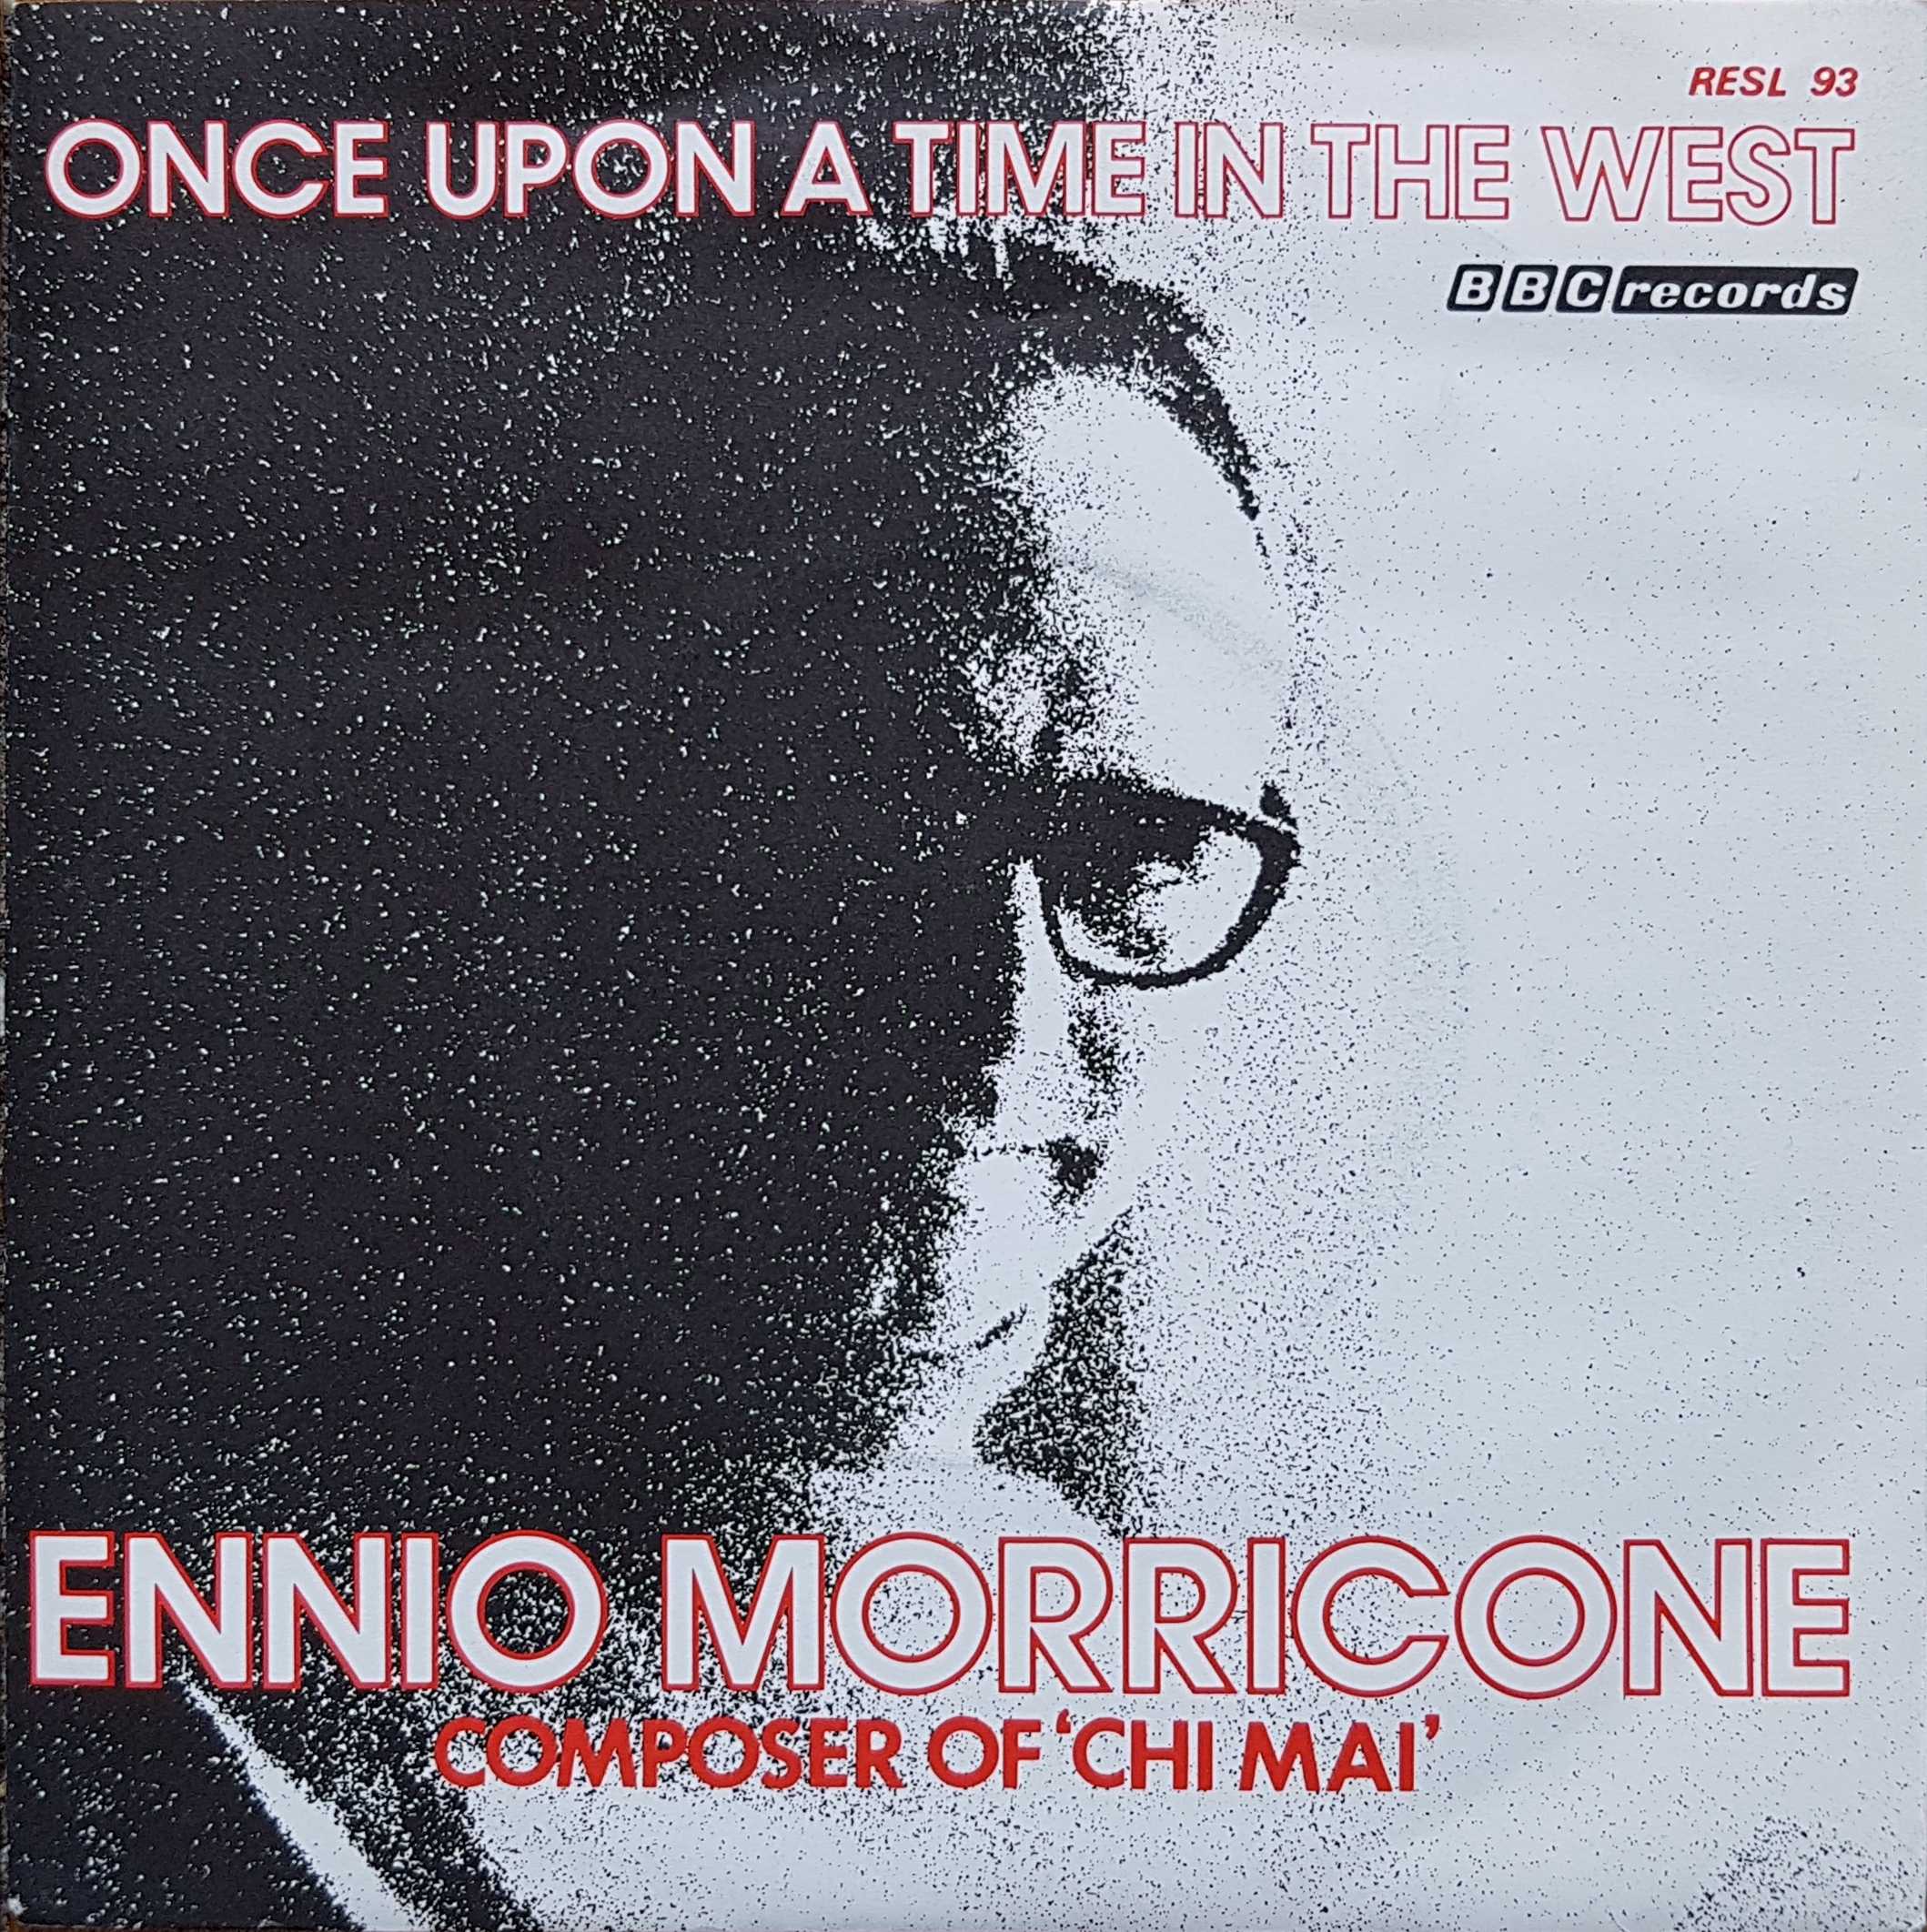 Picture of RESL 93 Once upon a time in the west by artist Ennio Morricone from the BBC singles - Records and Tapes library